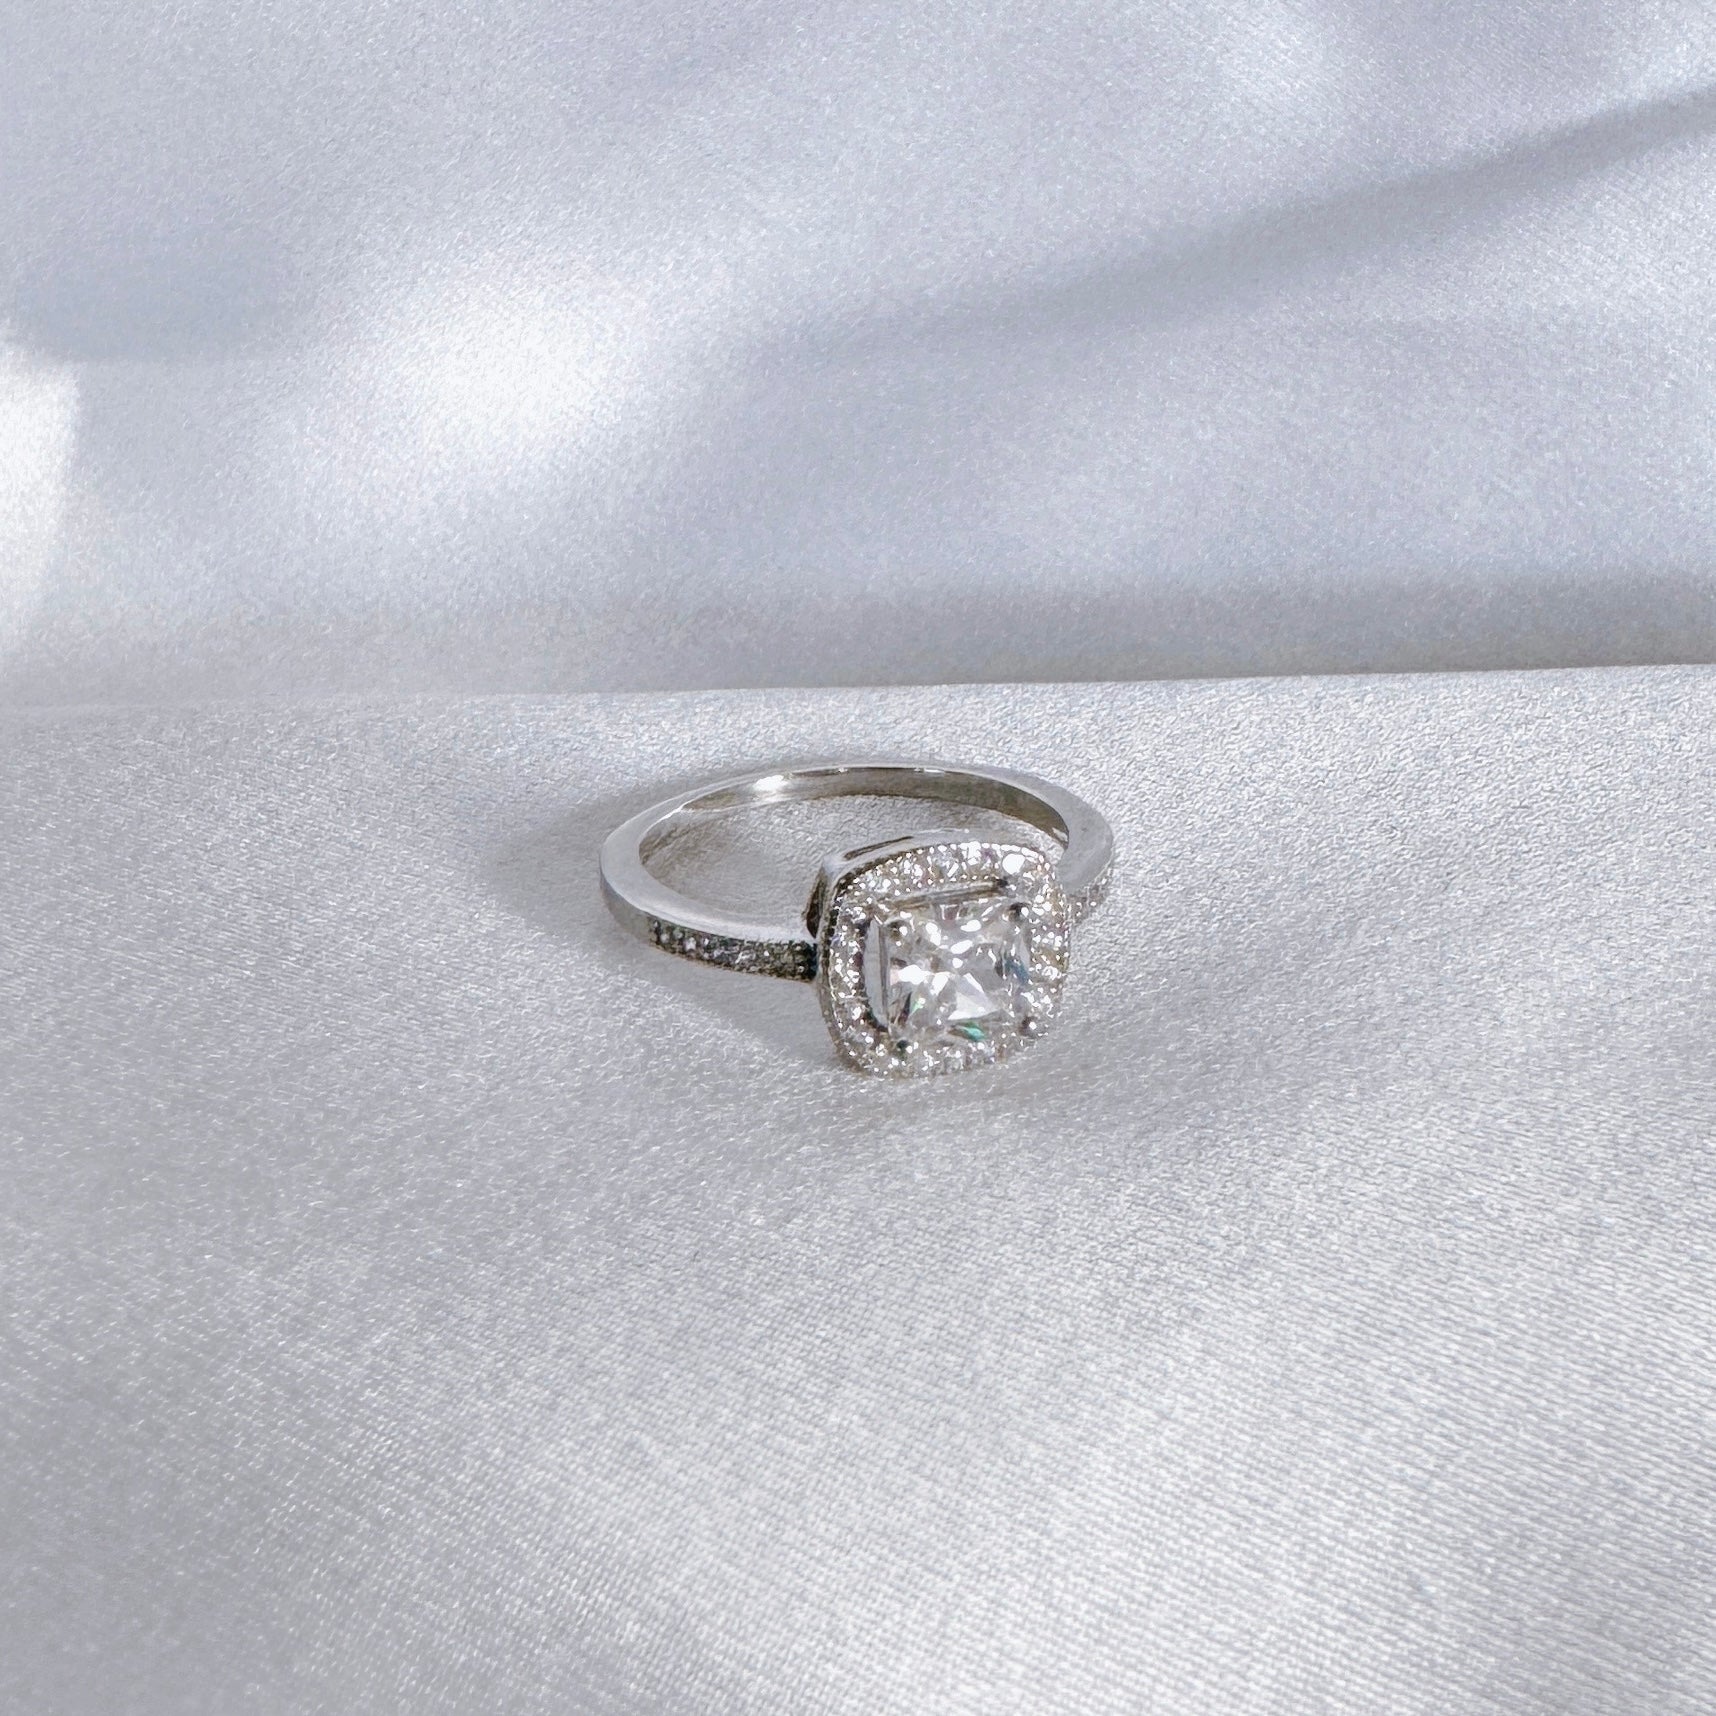 925 silver “Square Solitaire” ring